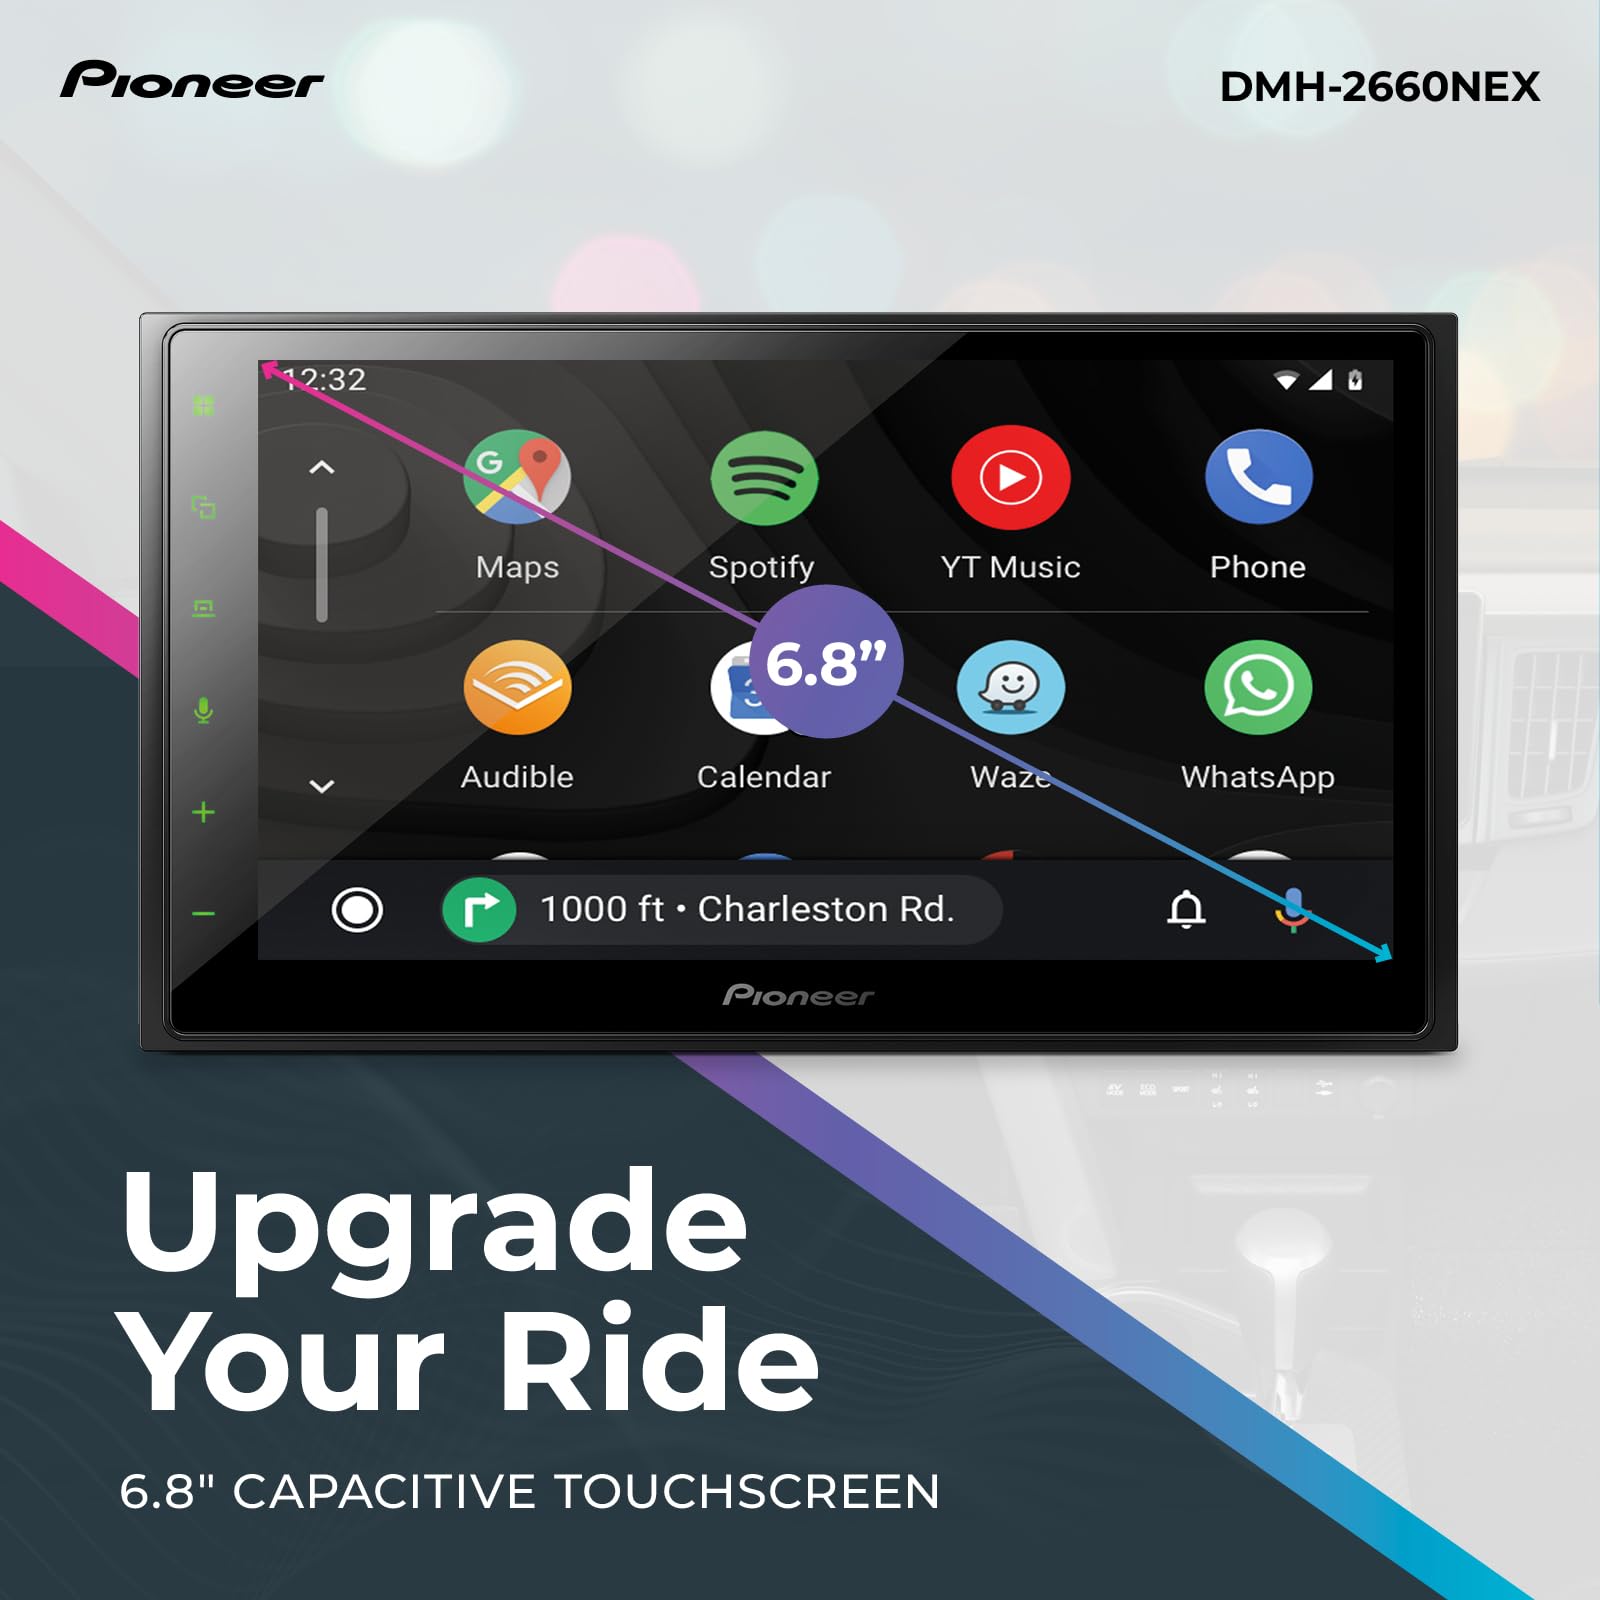 Pioneer DMH-2660NEX Digital Multimedia Receiver, with Apple CarPlay, Android Auto , Amazon Alexa via the Pioneer Vozsis App, Bluetooth and Backup Camera Compatibility, 6.8” Capacitive Touchscreen